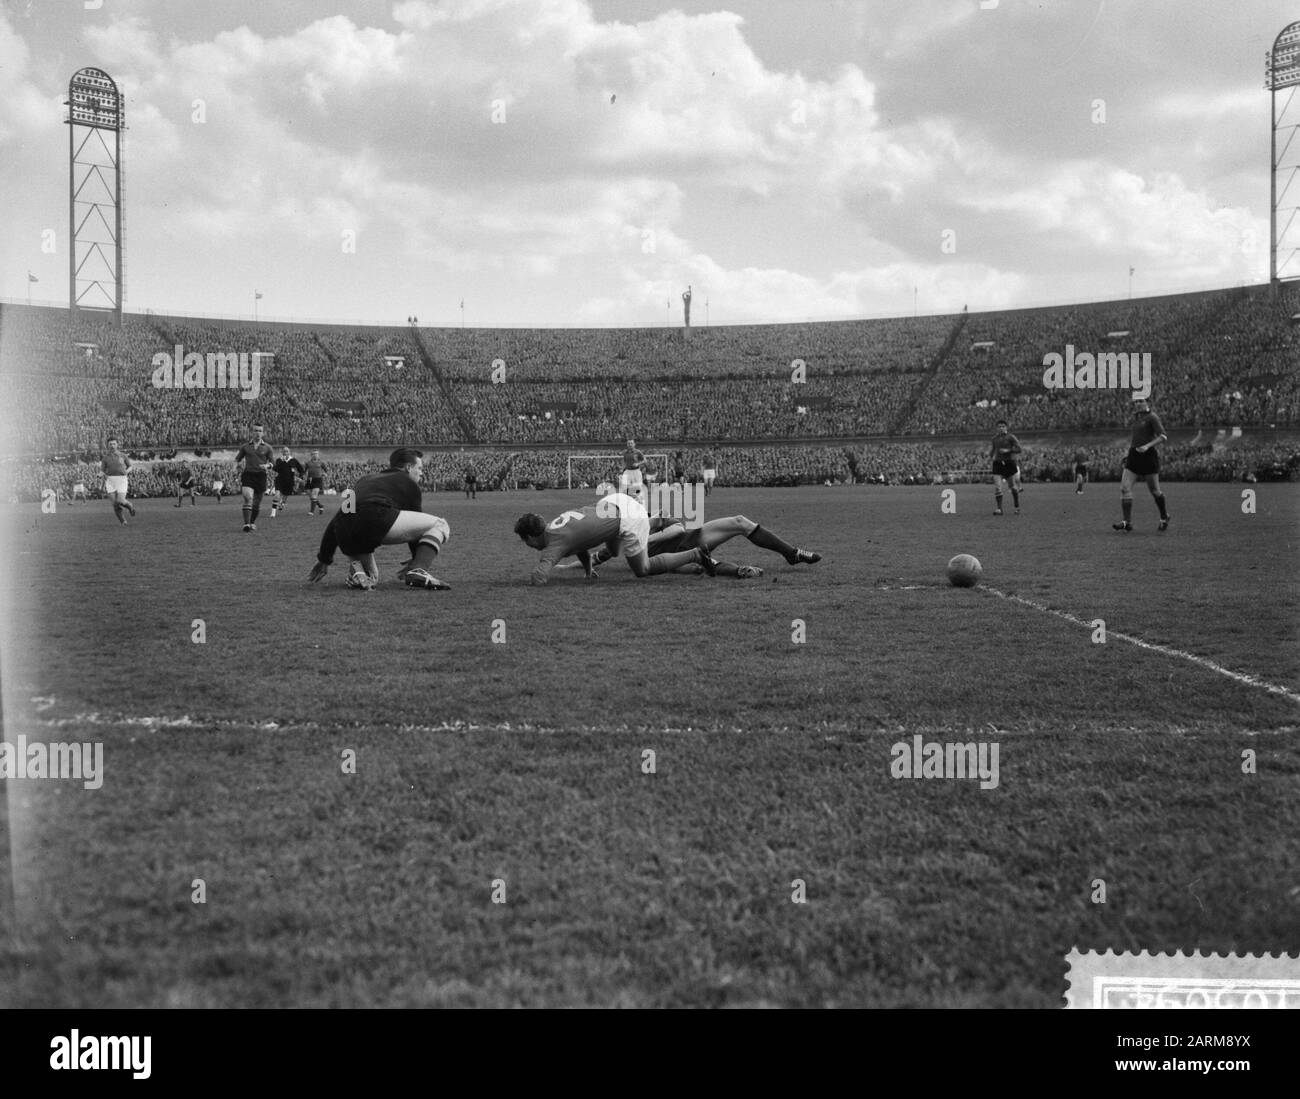 Holland versus Belgium 2-2 in the Olympic stadium in Amsterdam, game moment for the Belgian goal with Van der Steps Date: 19 april 1959 Keywords: sport, football Stock Photo